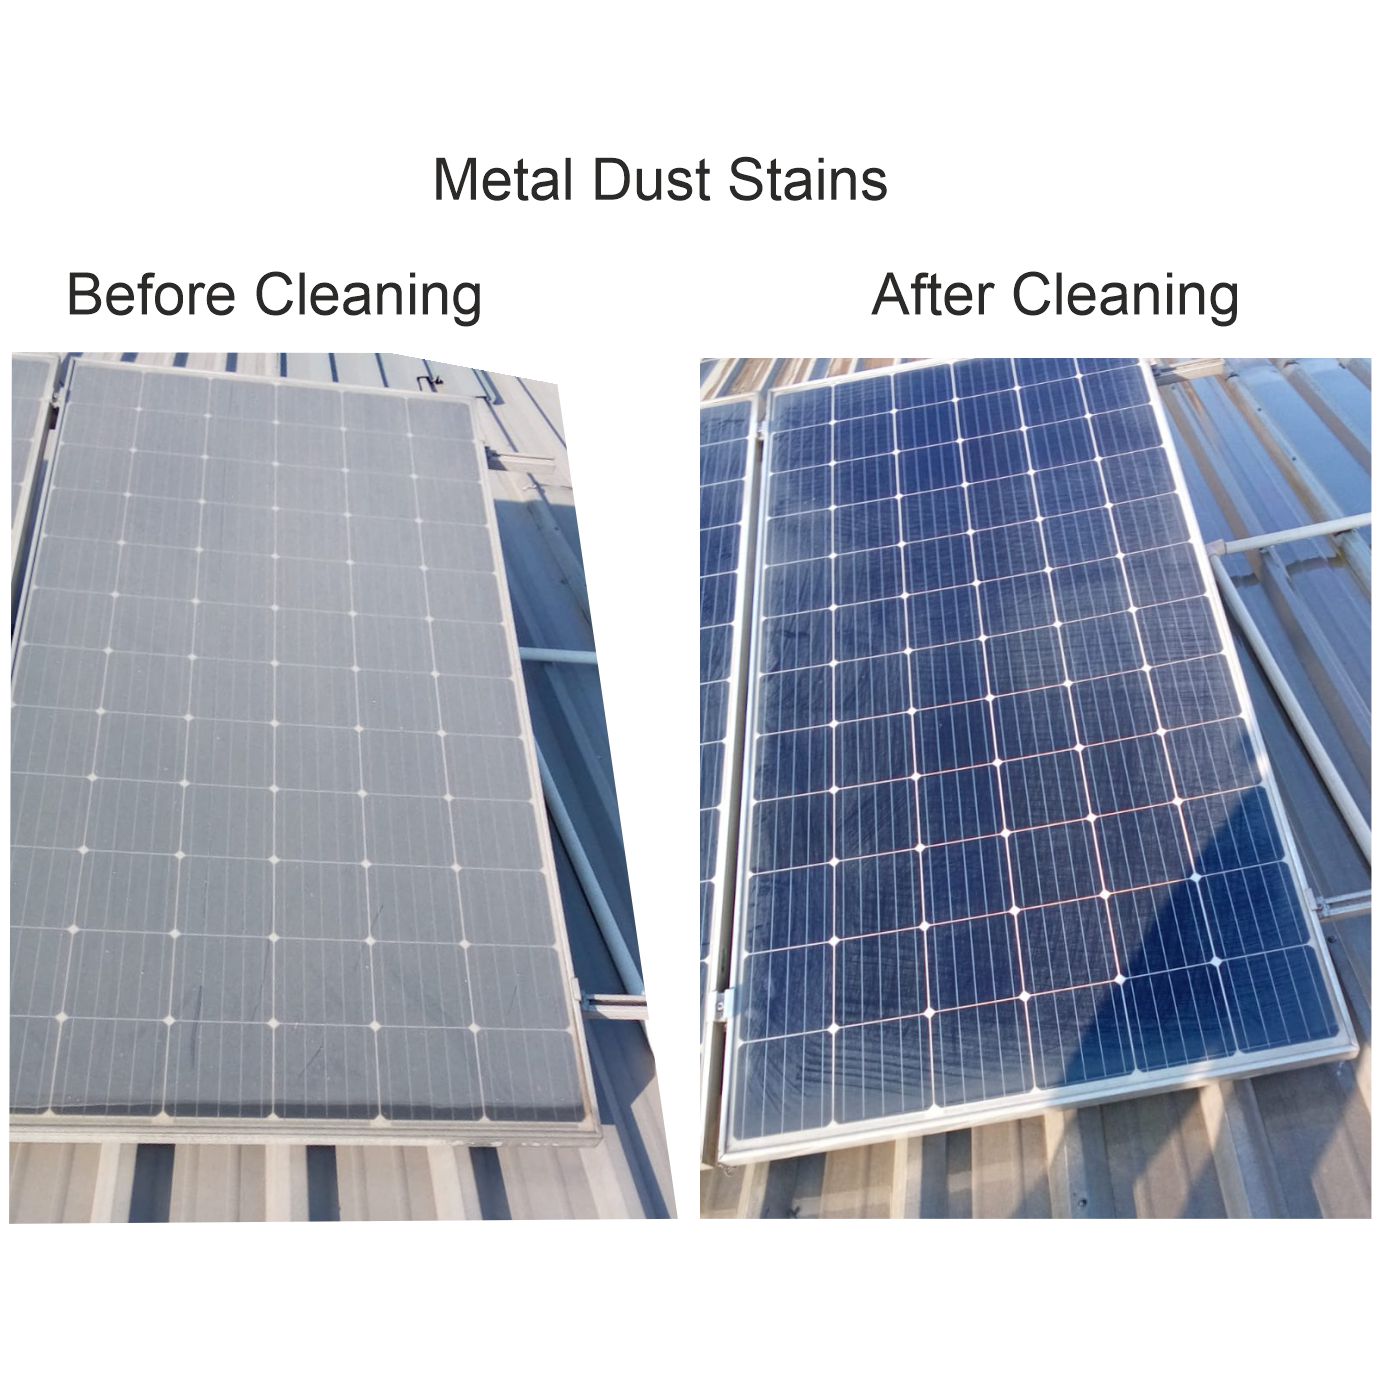 Heavy Duty Solar  Panel Cleaner TSPC-4 Remove Iron, Steel, metal, Aluminium, Rust and dust Particles